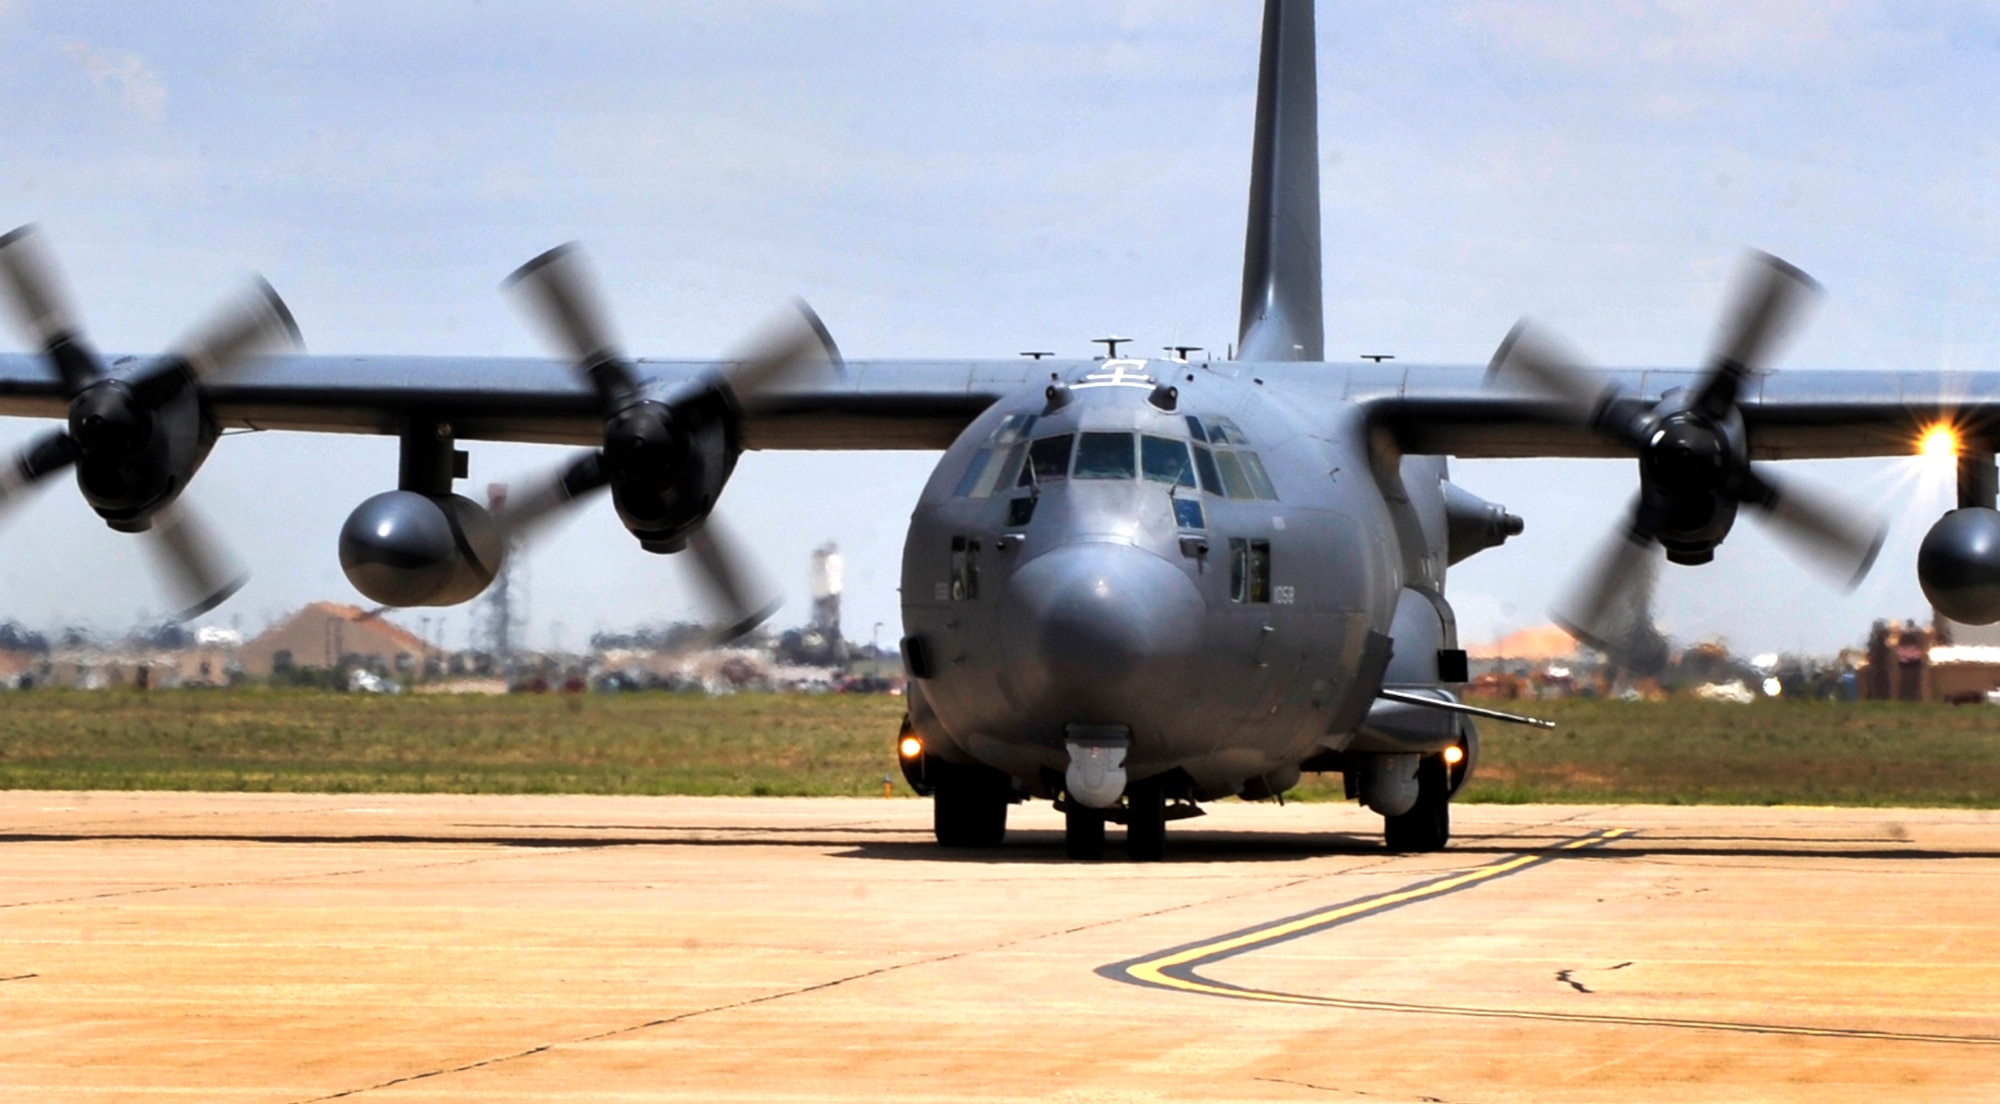 An AC-130W Stinger II, 73rd Special Operations Squadron, taxis down the flight line at Cannon Air Force Base, N.M., July 12, 2012. The Stinger is operated by the 73 SOS who’s dedicated and level-headed Airmen strive every day to ensure that their motto “Without fail” is achieved. (U.S. Air Force photo by Airman 1st Class Ericka Engblom)